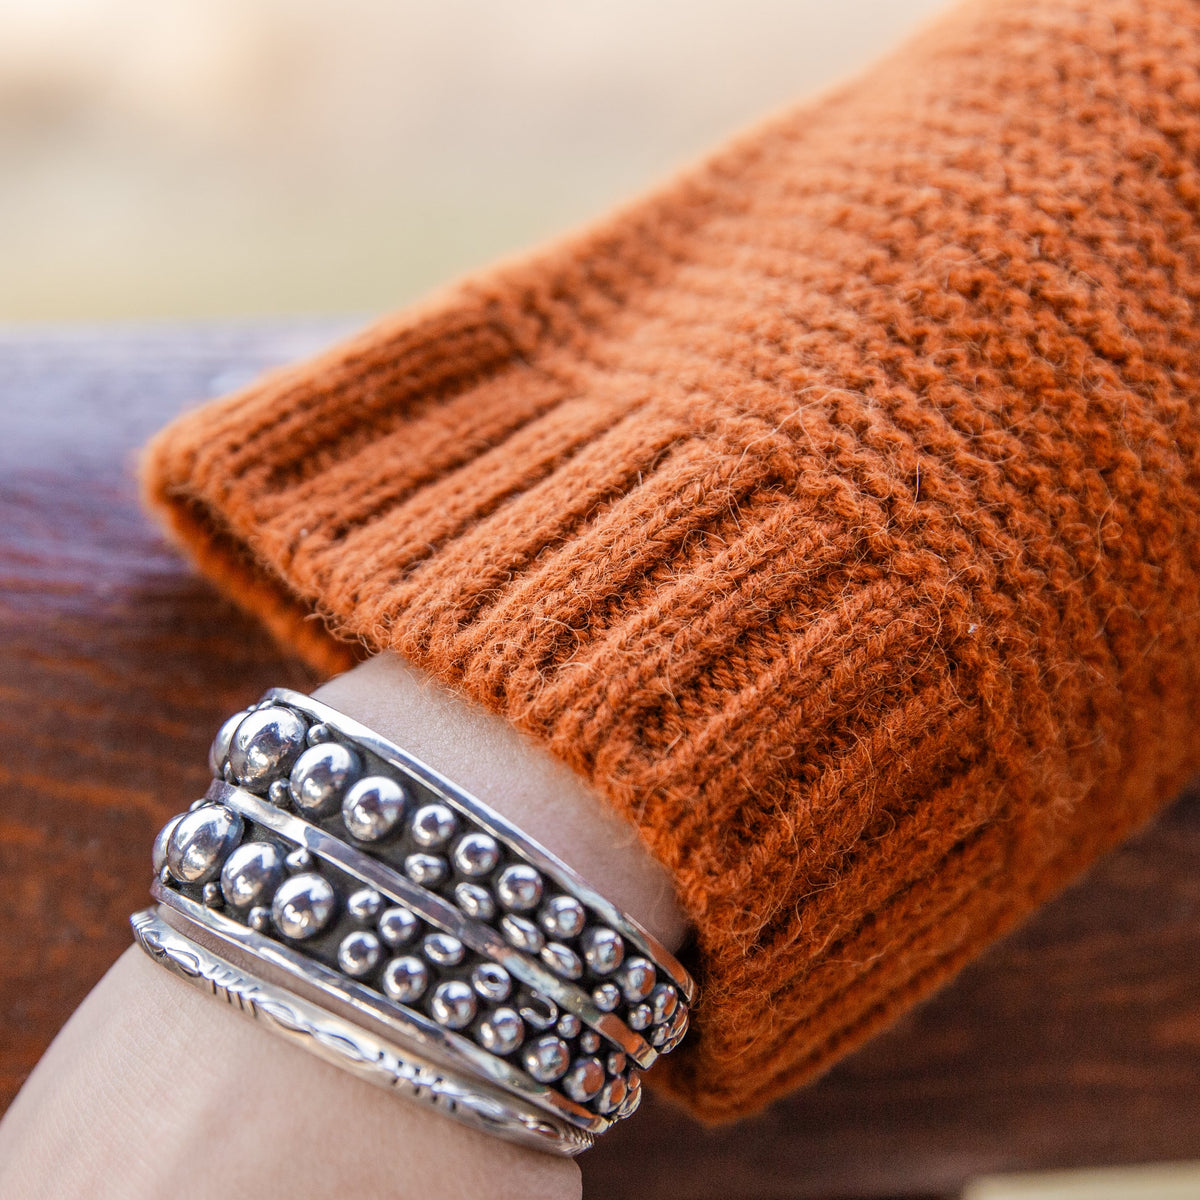 A close-up of a woman&#39;s wrist wearing silver bracelets and the soft comfortable cute fashionable cozy sweater in the color autumn orange.